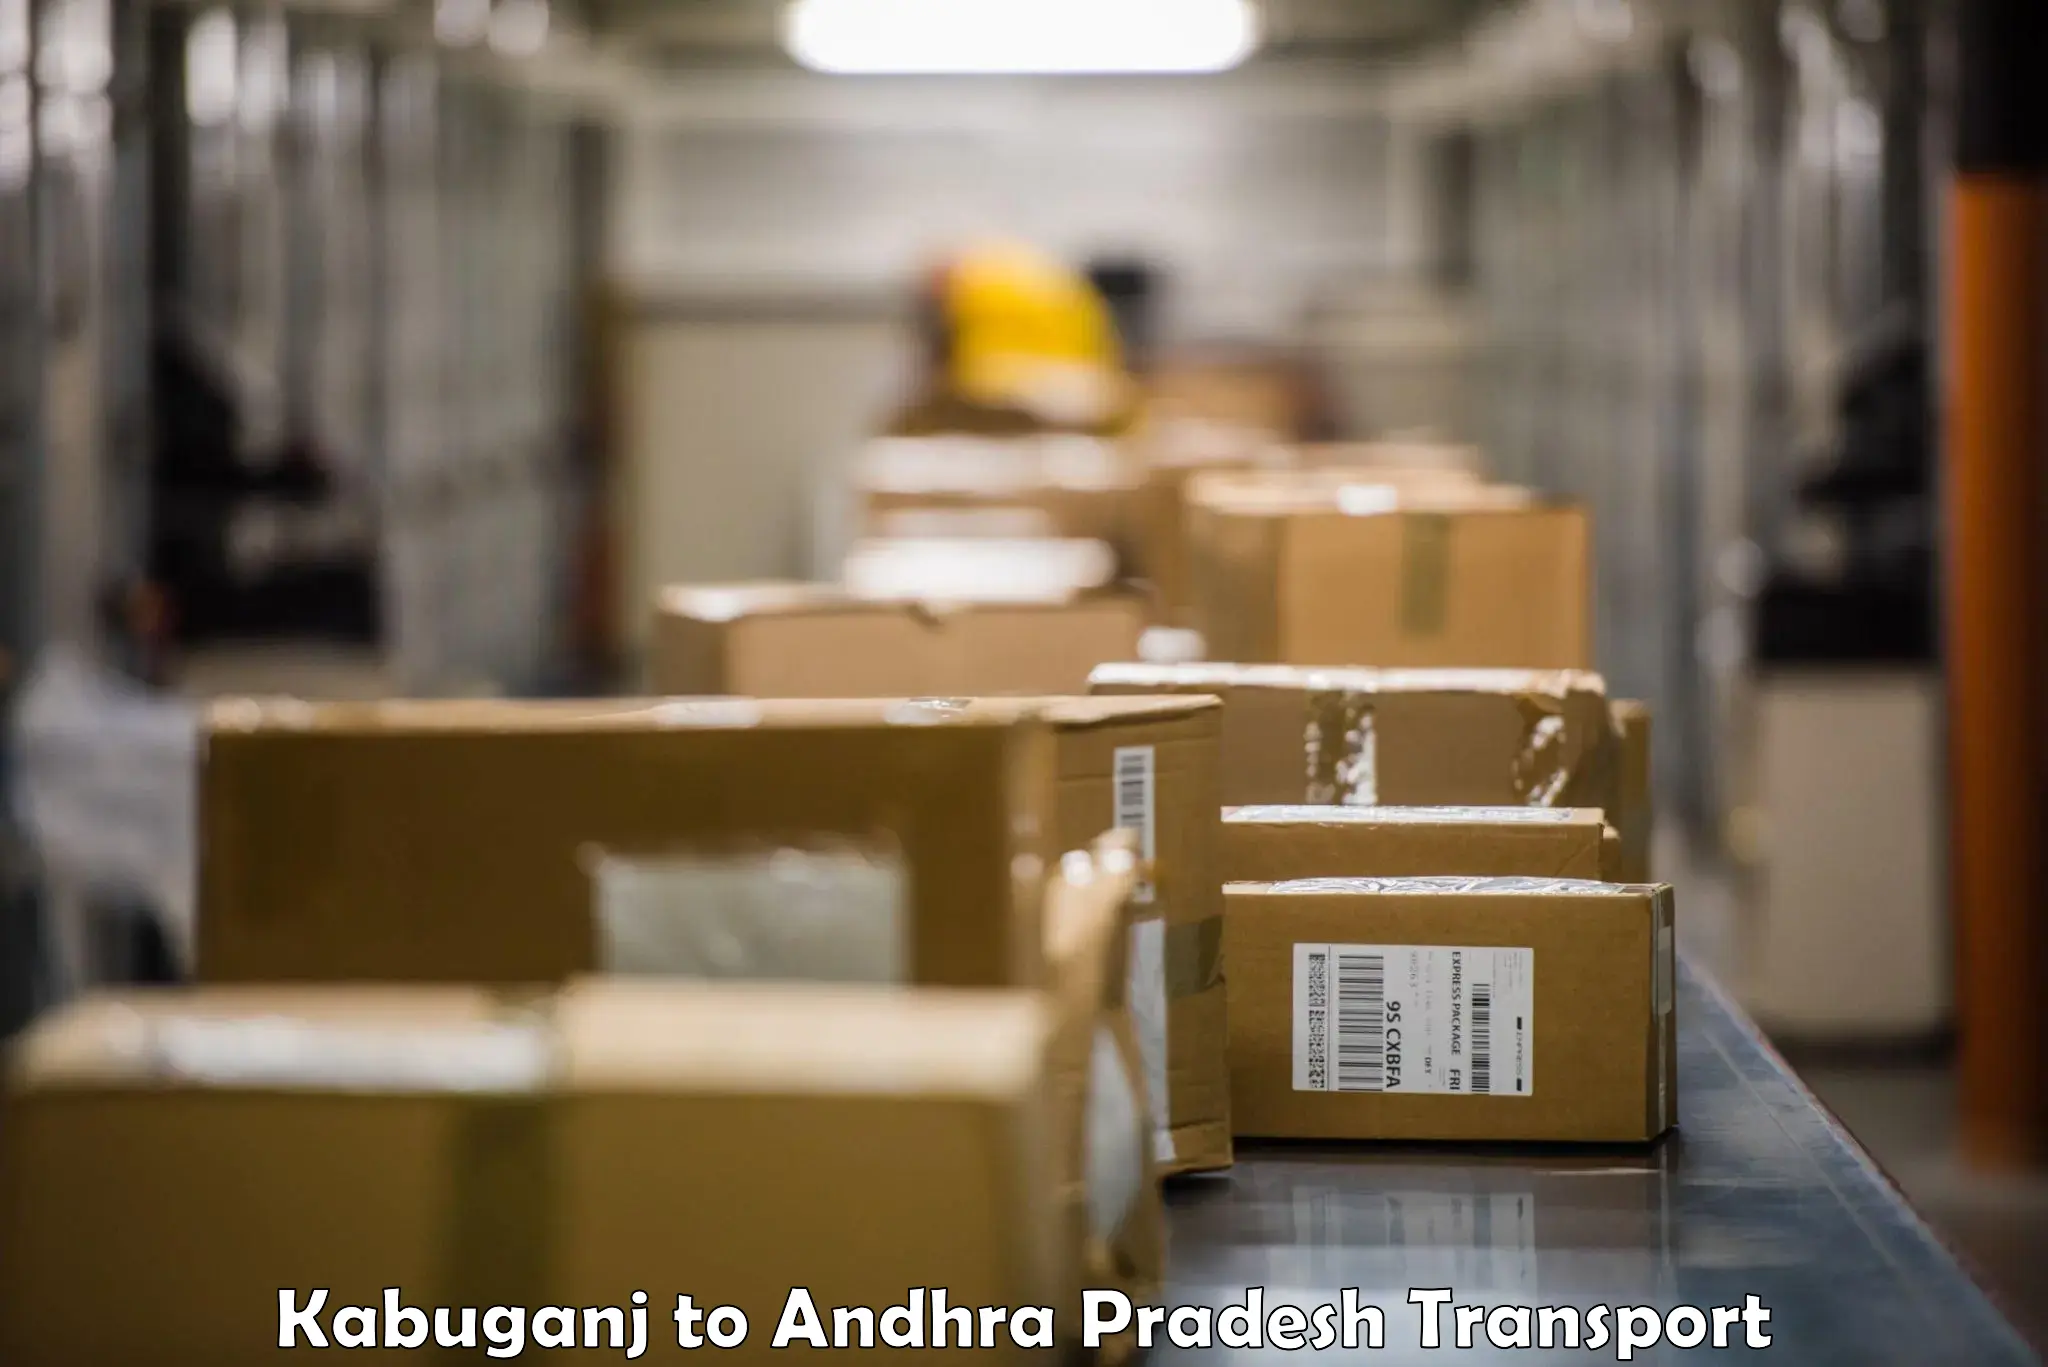 Truck transport companies in India Kabuganj to Bhattiprolu